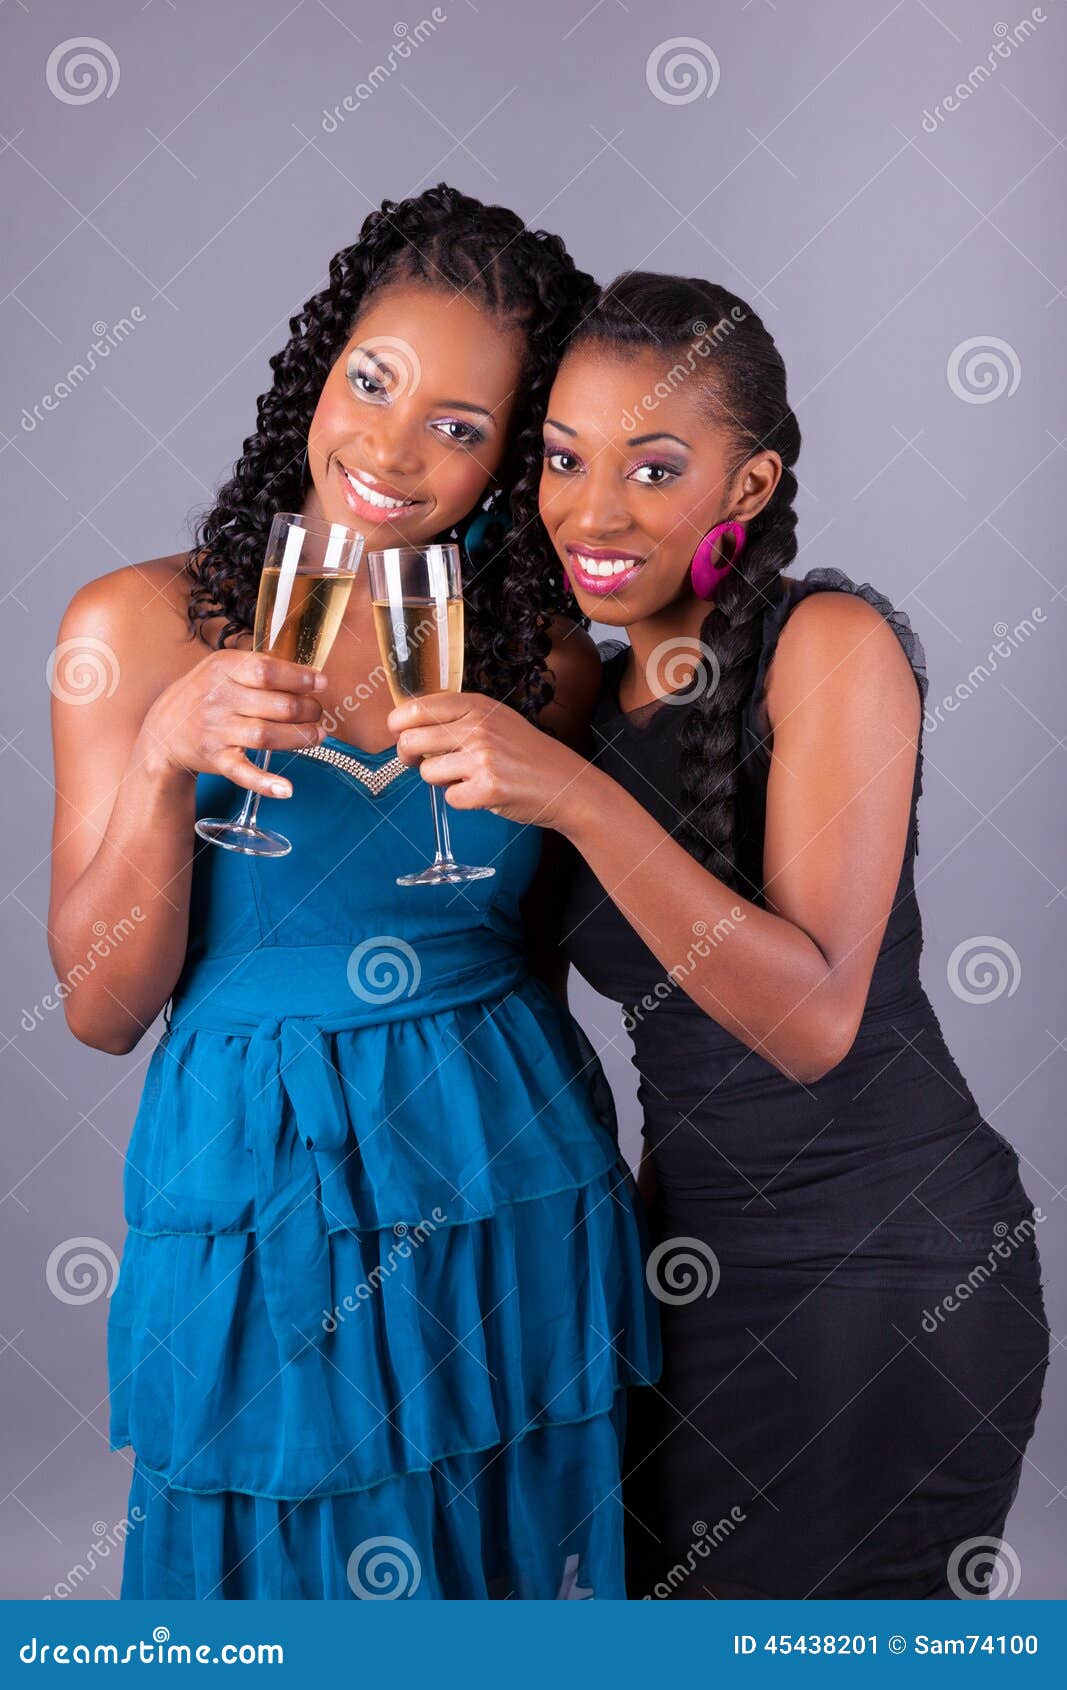 Young Beautiful African Womans Holding a Glass of Champagne Stock Image ...